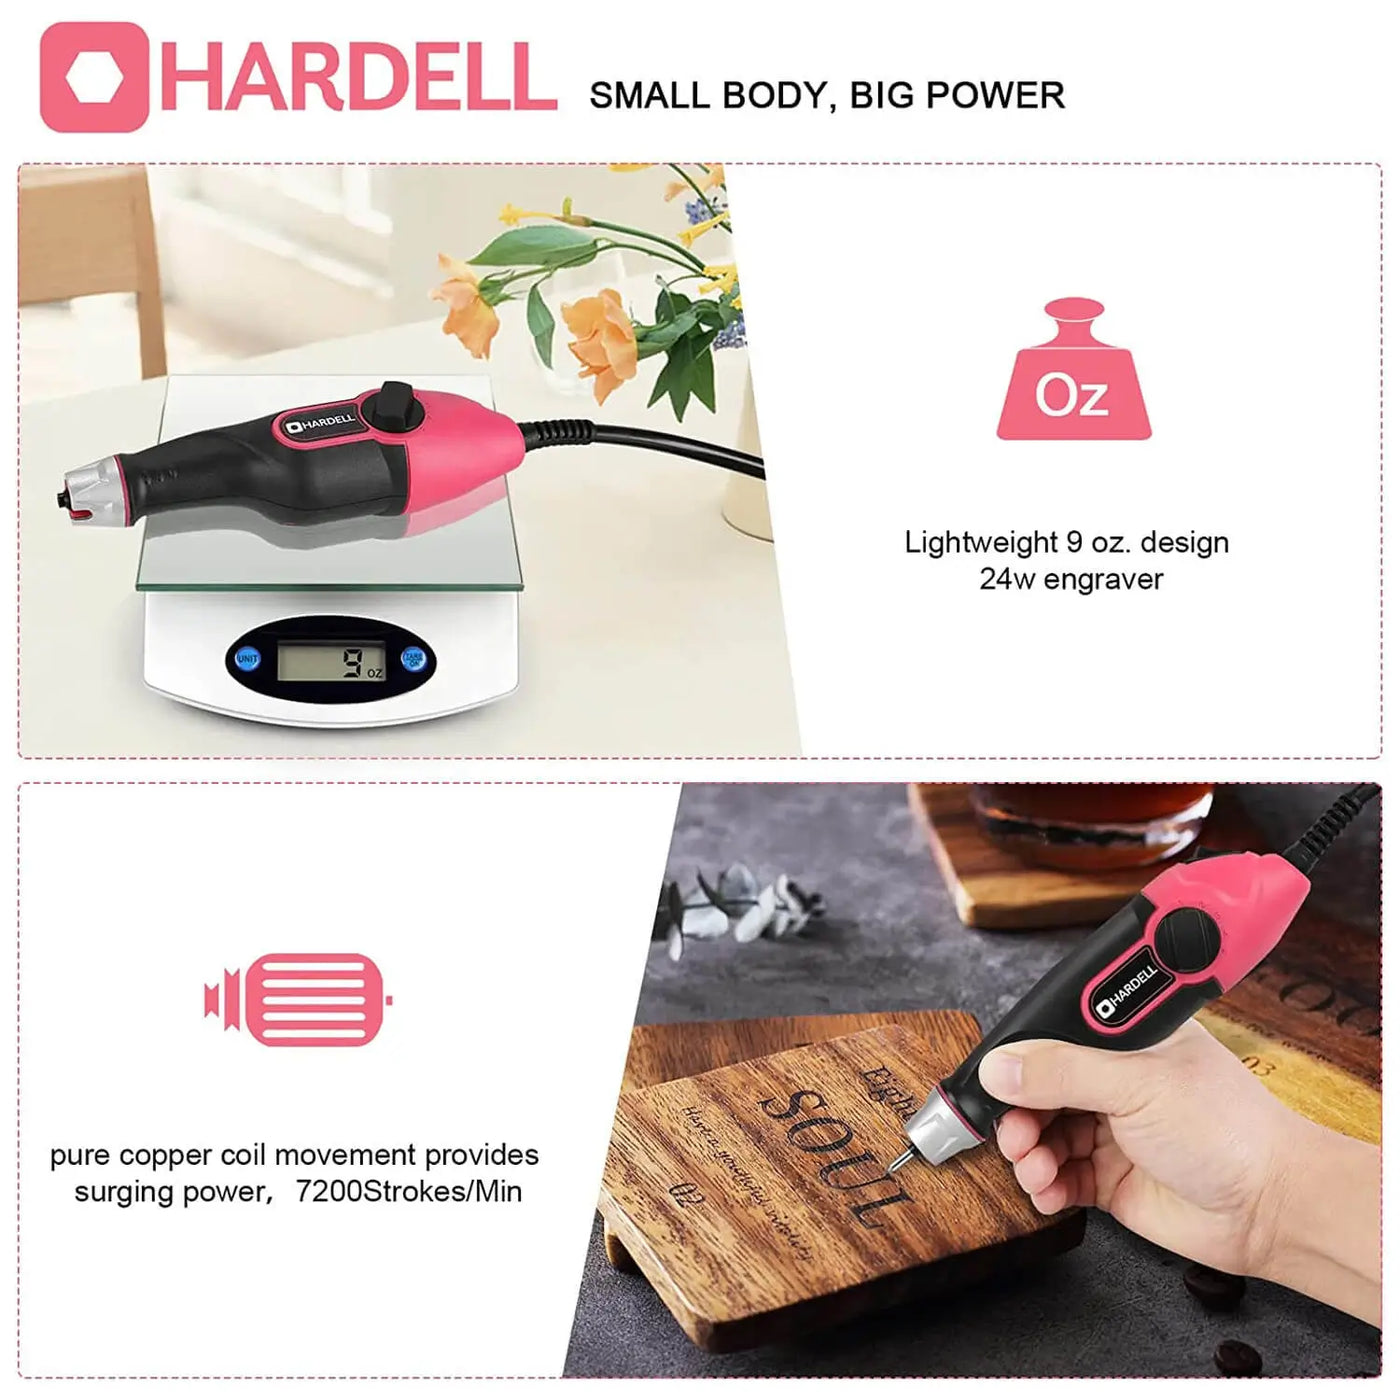 Hardell_106_24W_Corded_Engraver_06